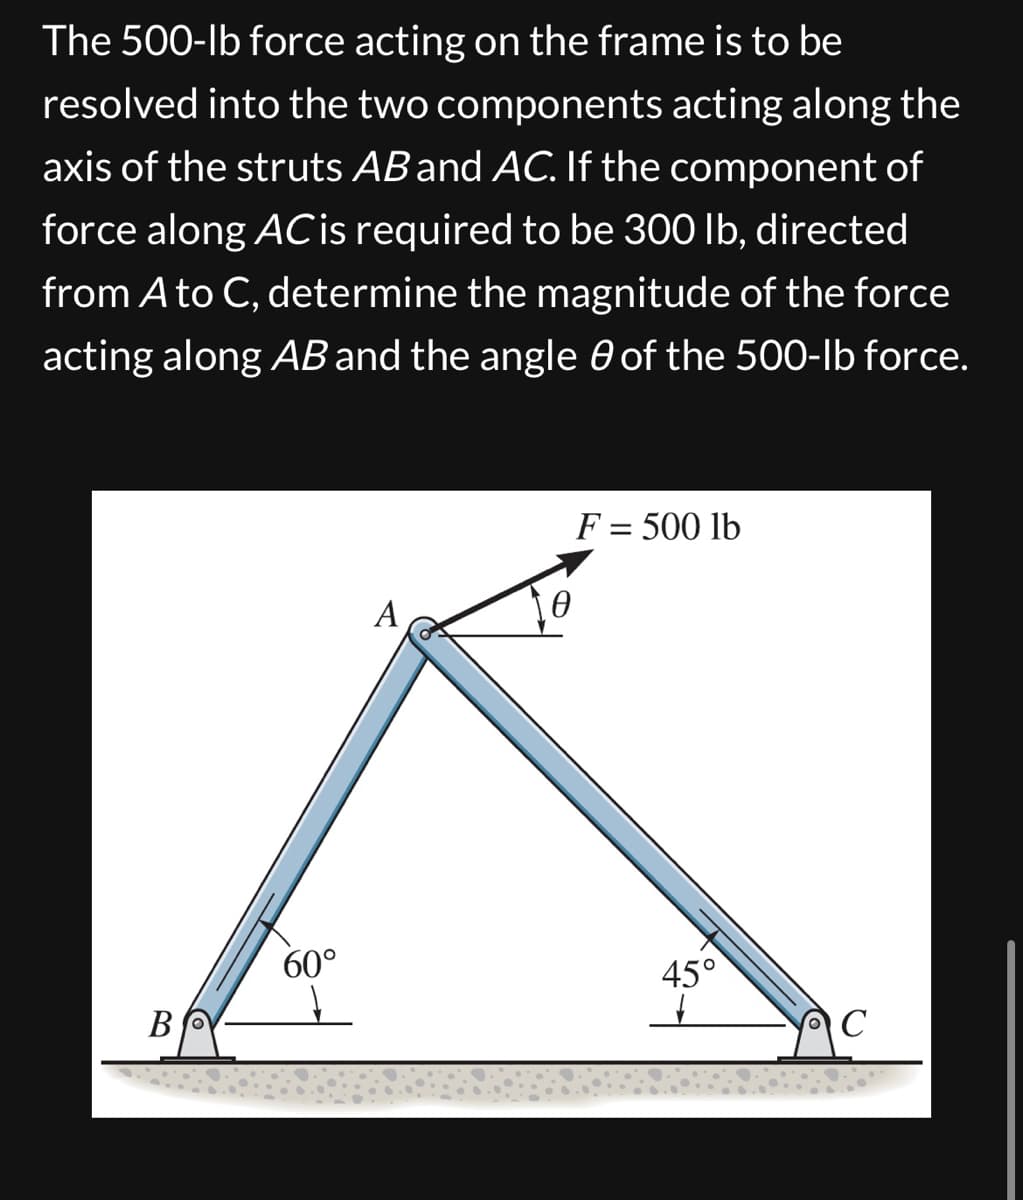 The 500-lb force acting on the frame is to be
resolved into the two components acting along the
axis of the struts AB and AC. If the component of
force along AC is required to be 300 lb, directed
from A to C, determine the magnitude of the force
acting along AB and the angle of the 500-lb force.
B
60°
A
Ꮎ
F = 500 lb
45°
C